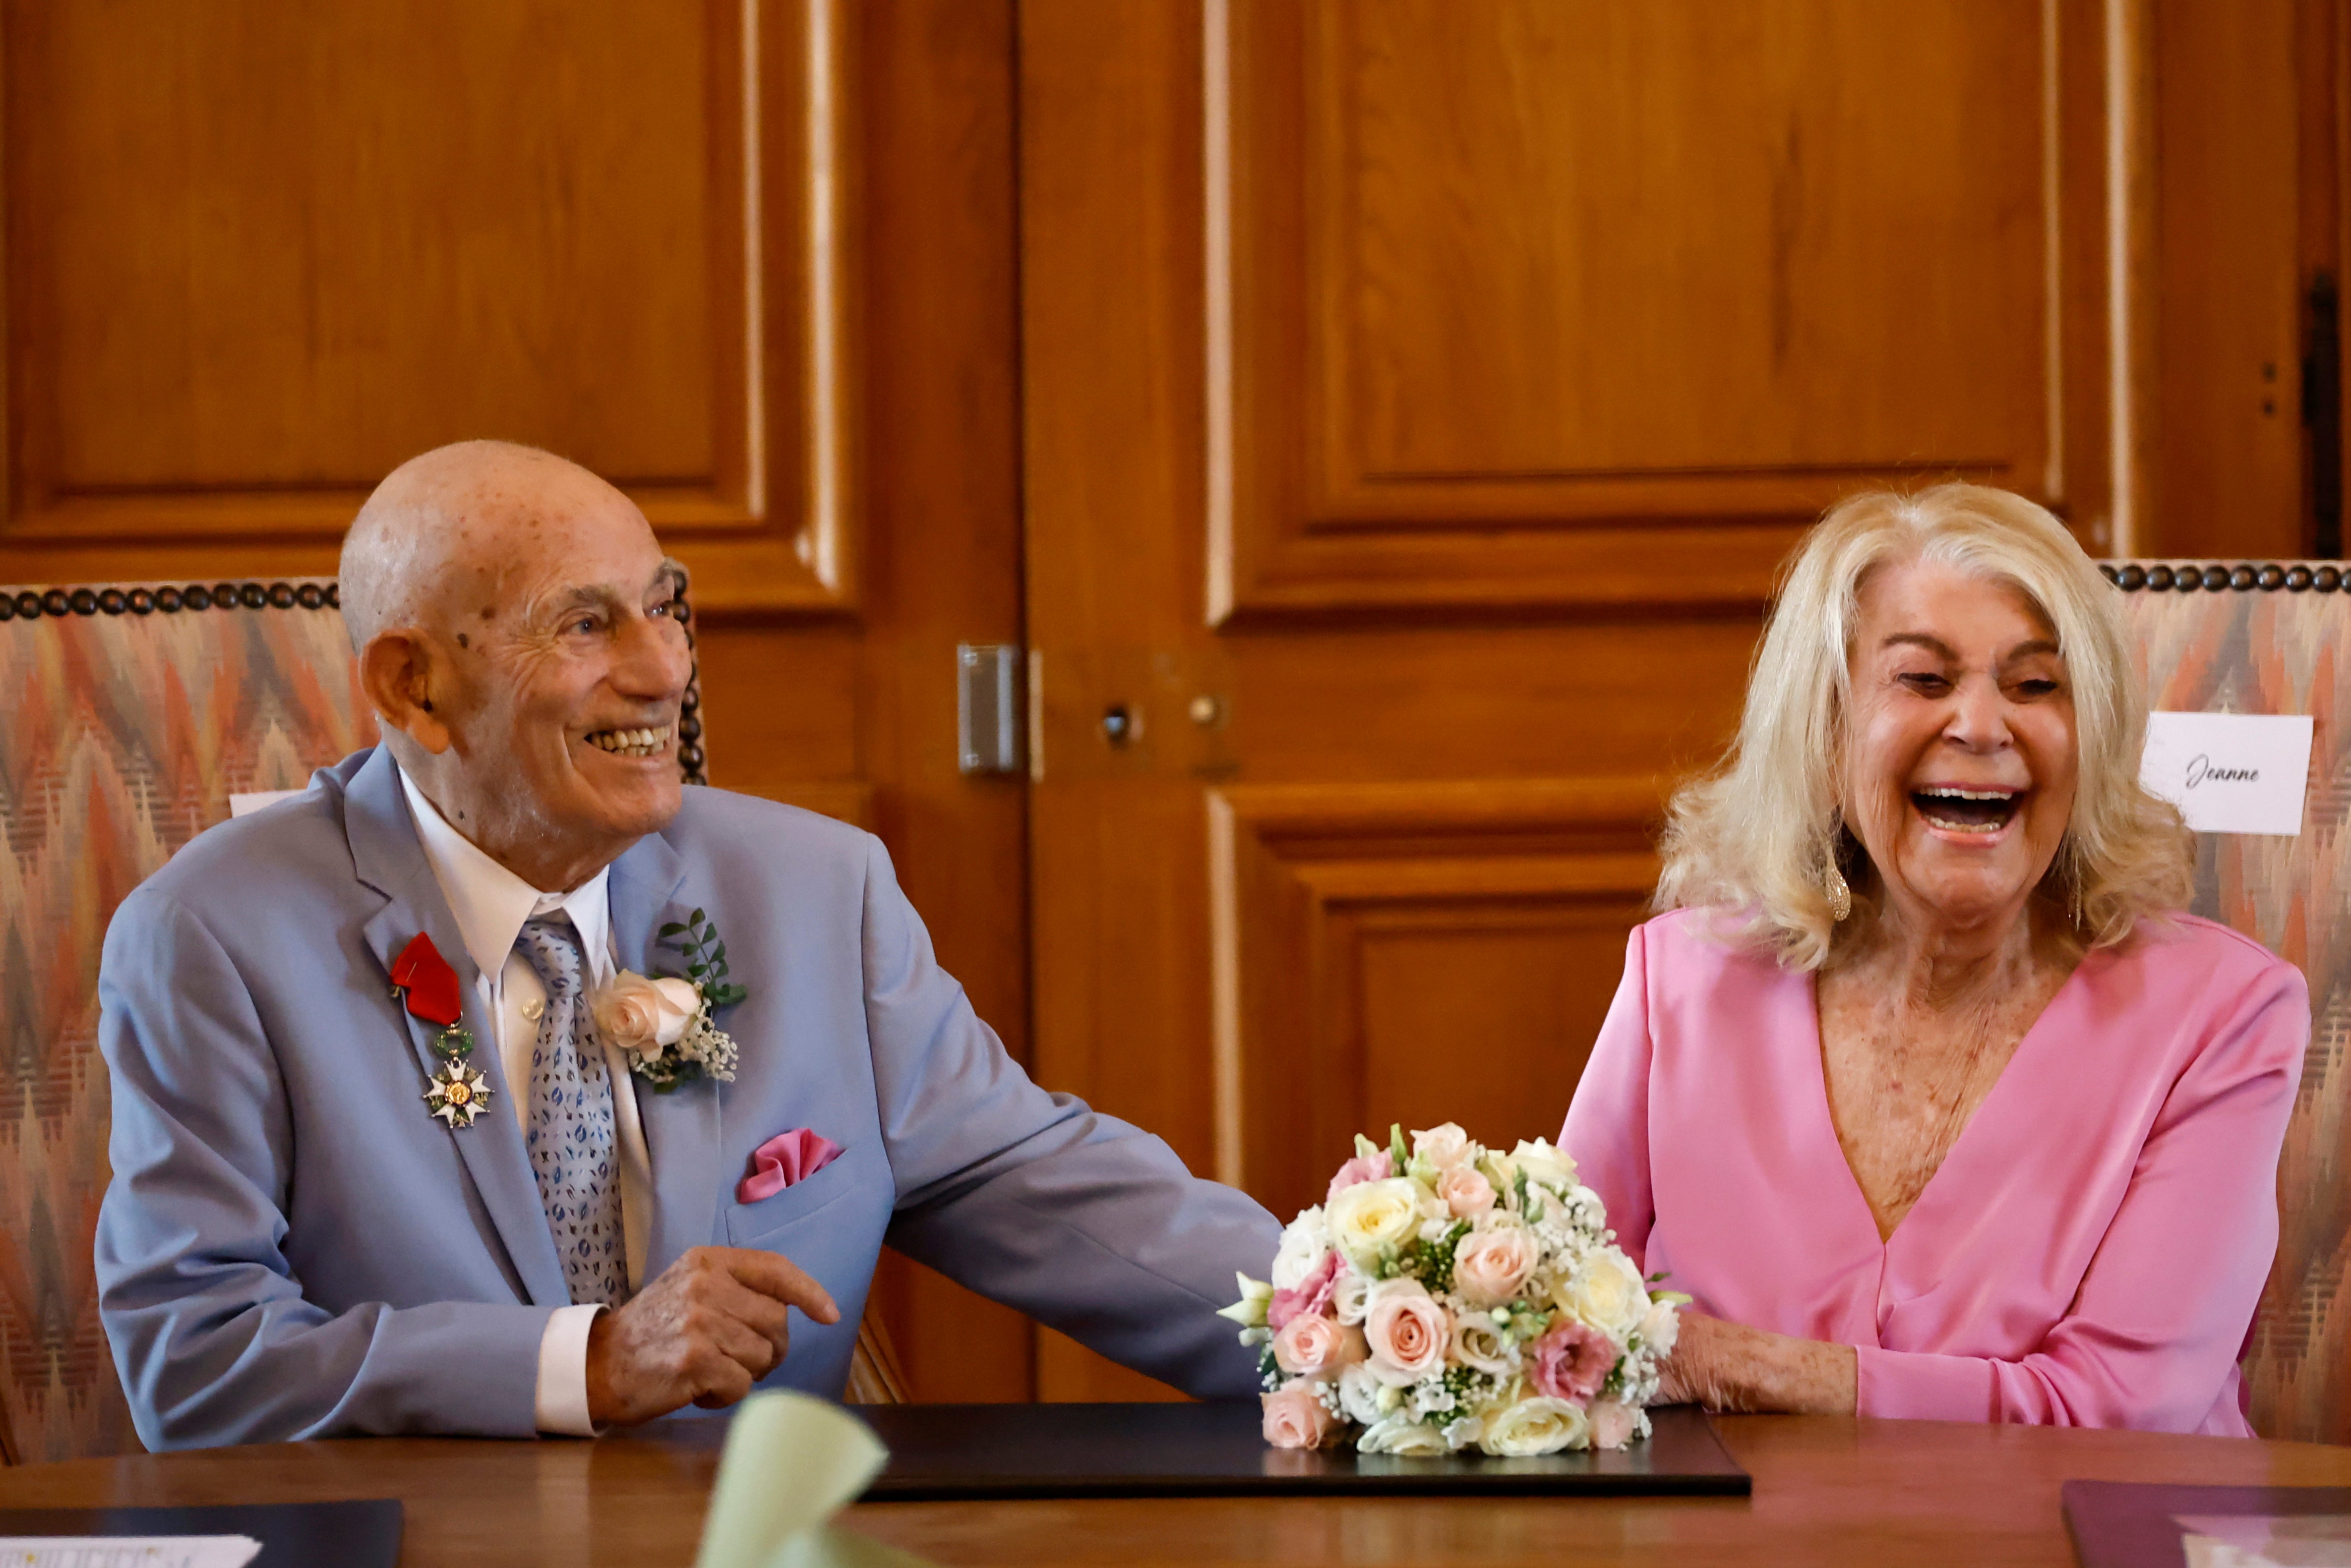 WWII veteran Harold Terens, 100, ties the knot with Jeanne Swerlin, 96, on 80th anniversary of D-Day